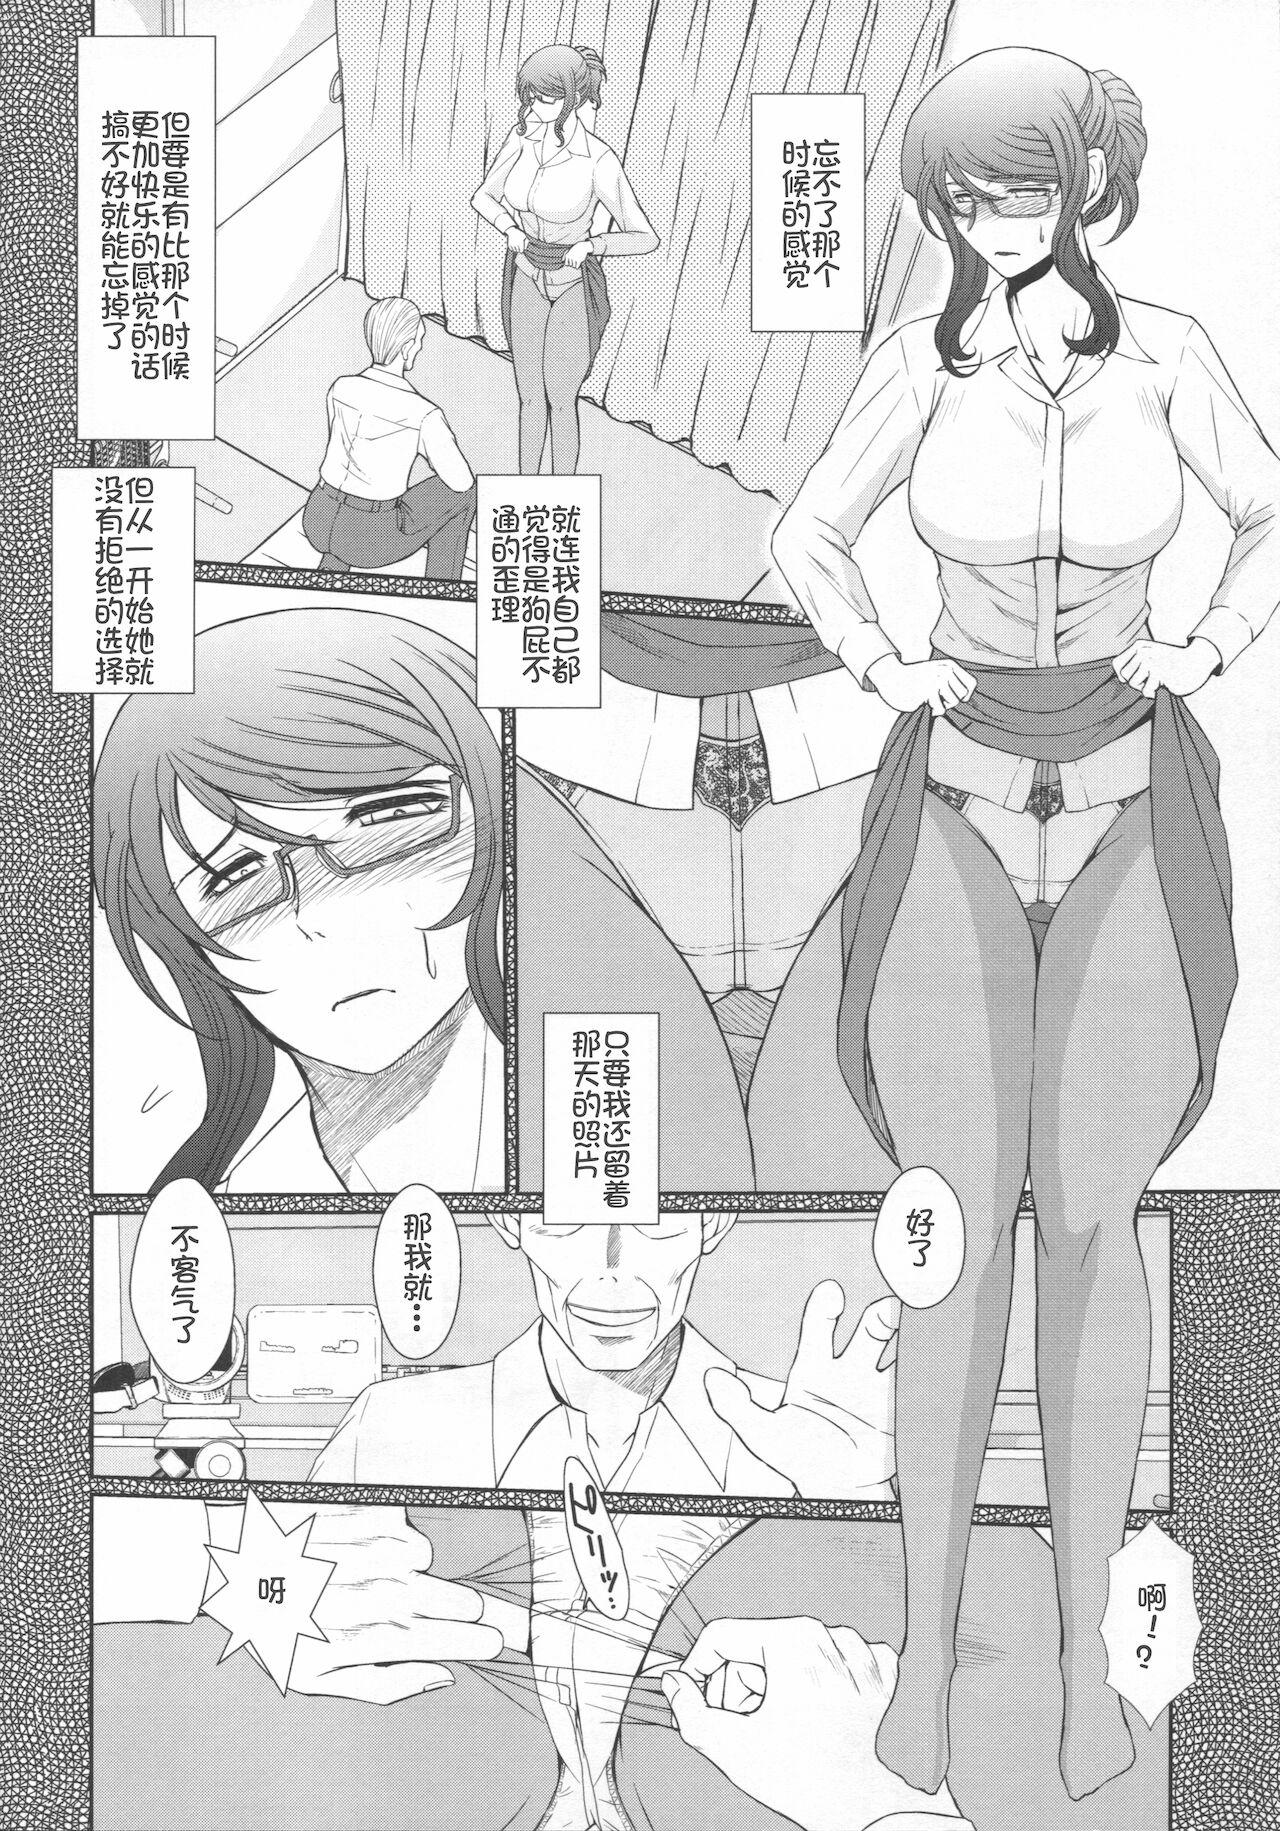 Office Zoku Akai Boushi no Onna - Woman with a red cap - Kyuujou lovers Bigtits - Page 6